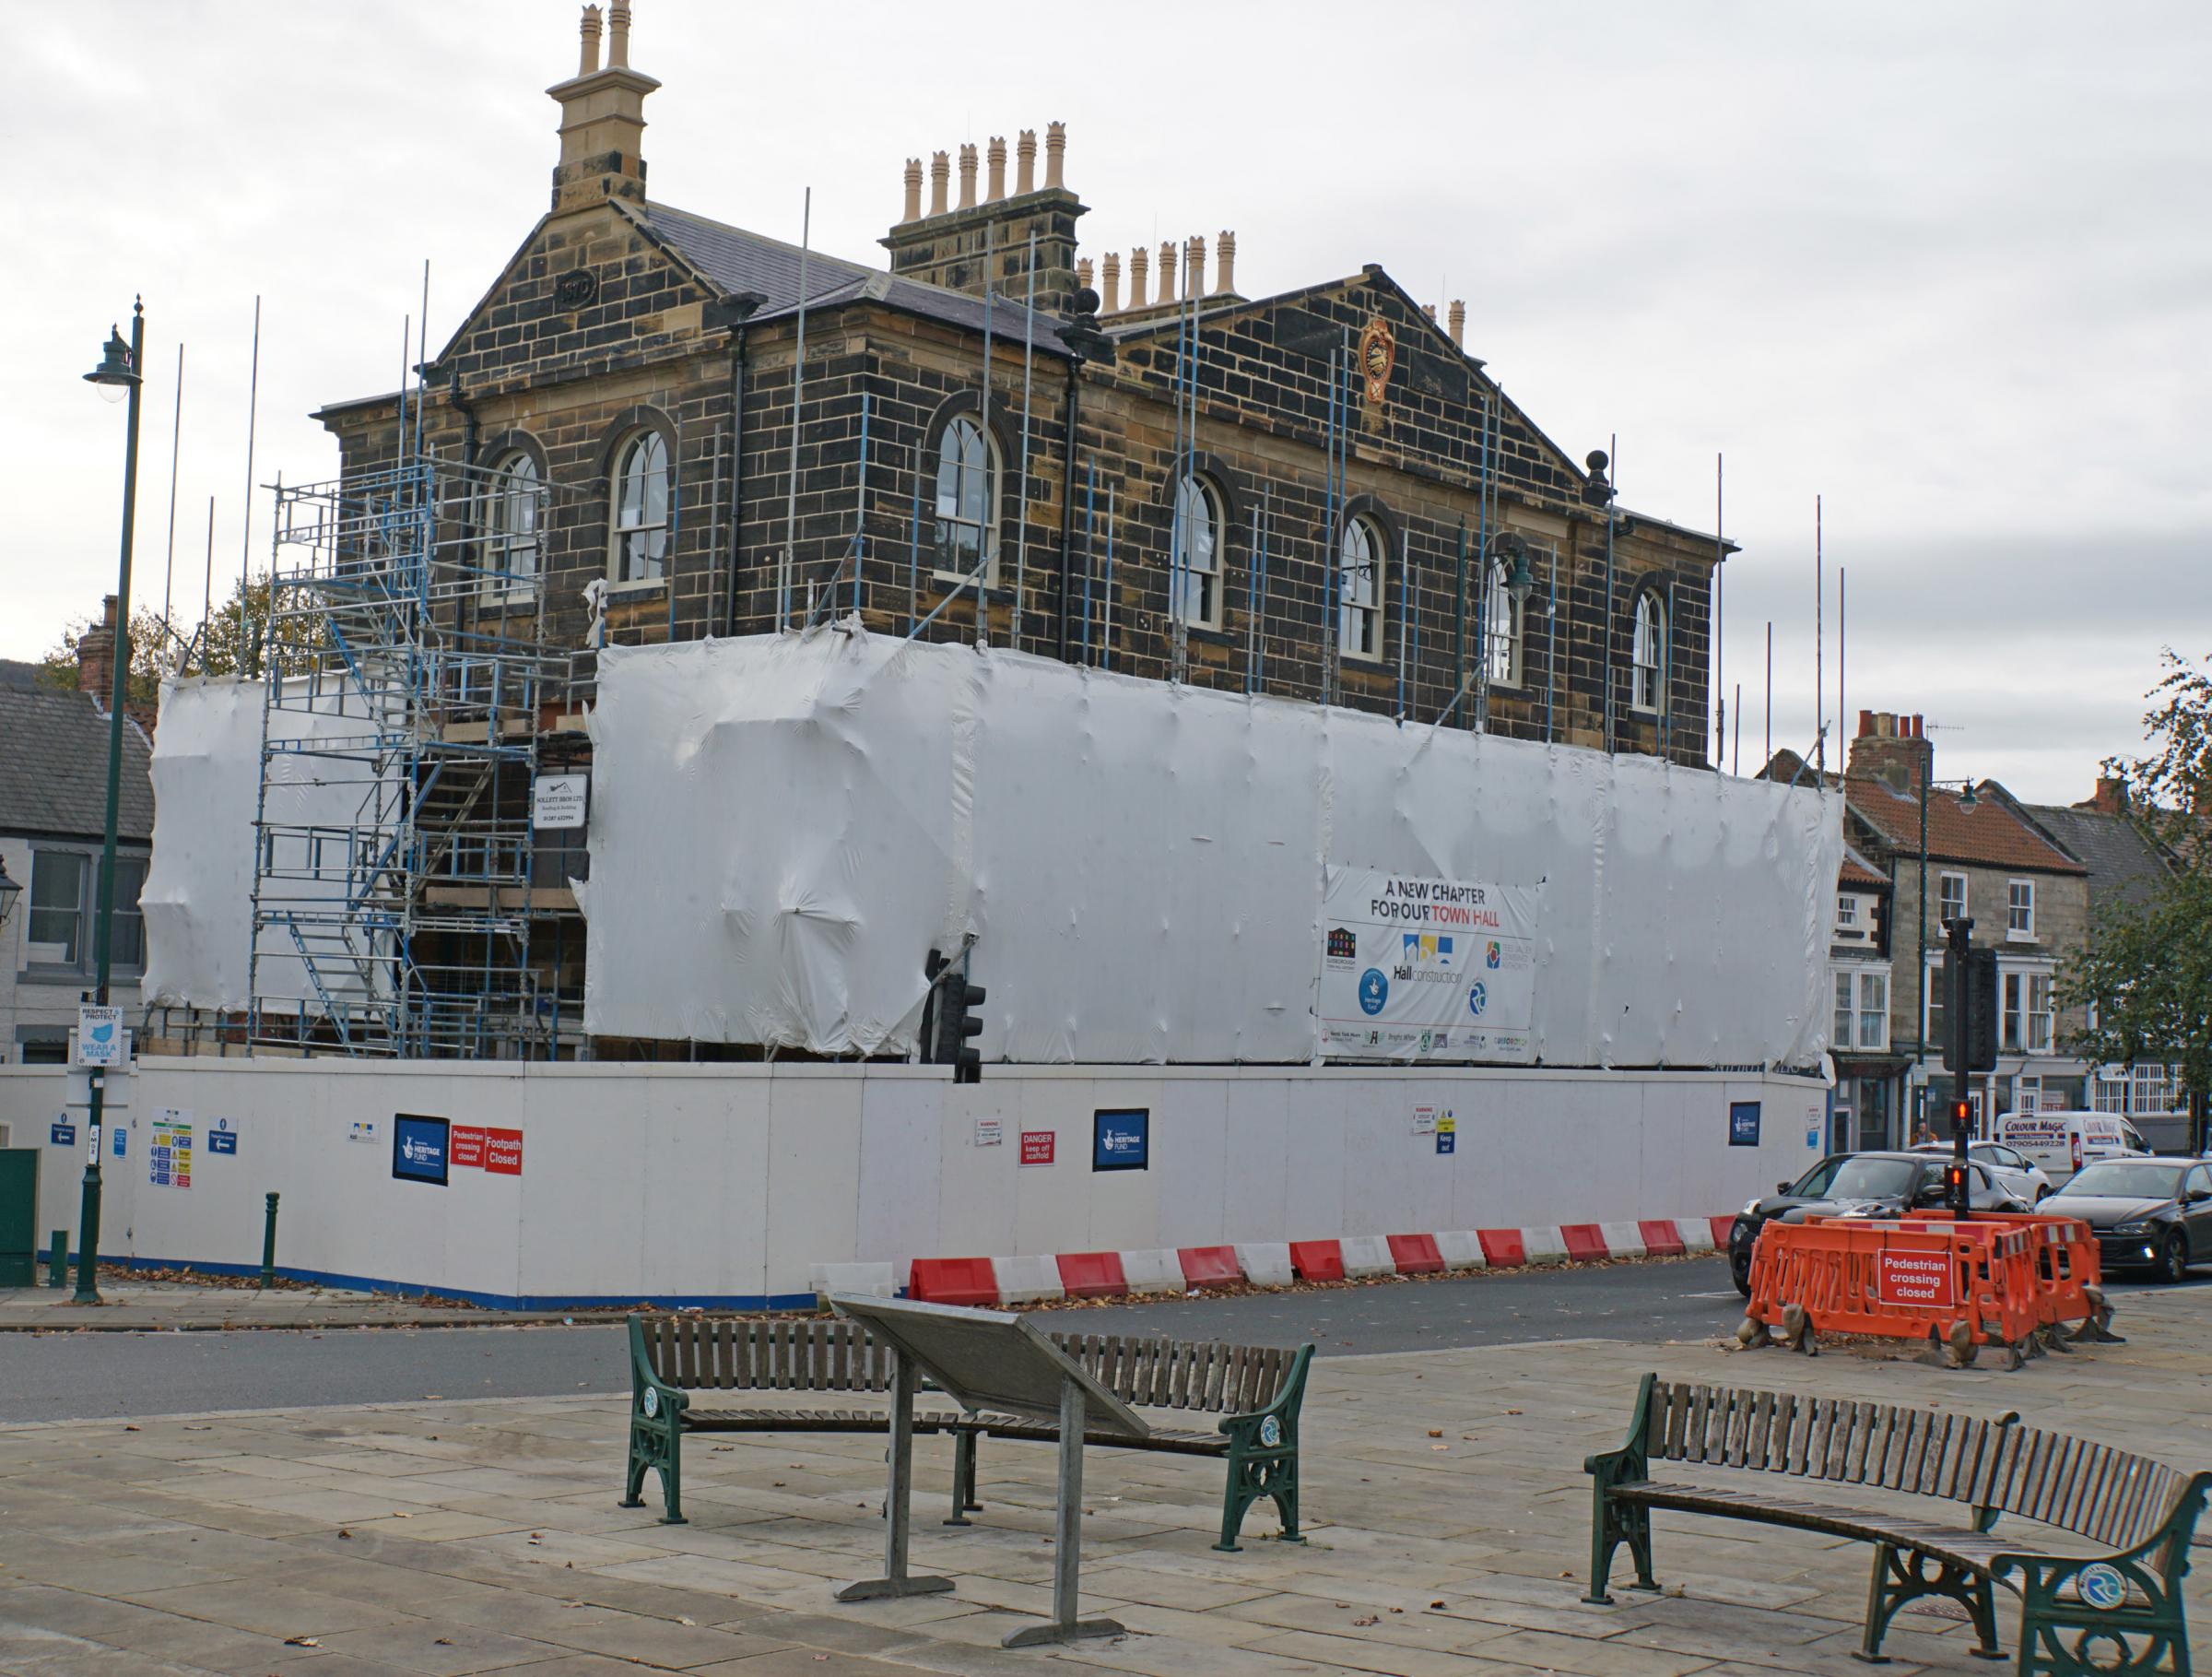 The current state of Guisborough Town Hall